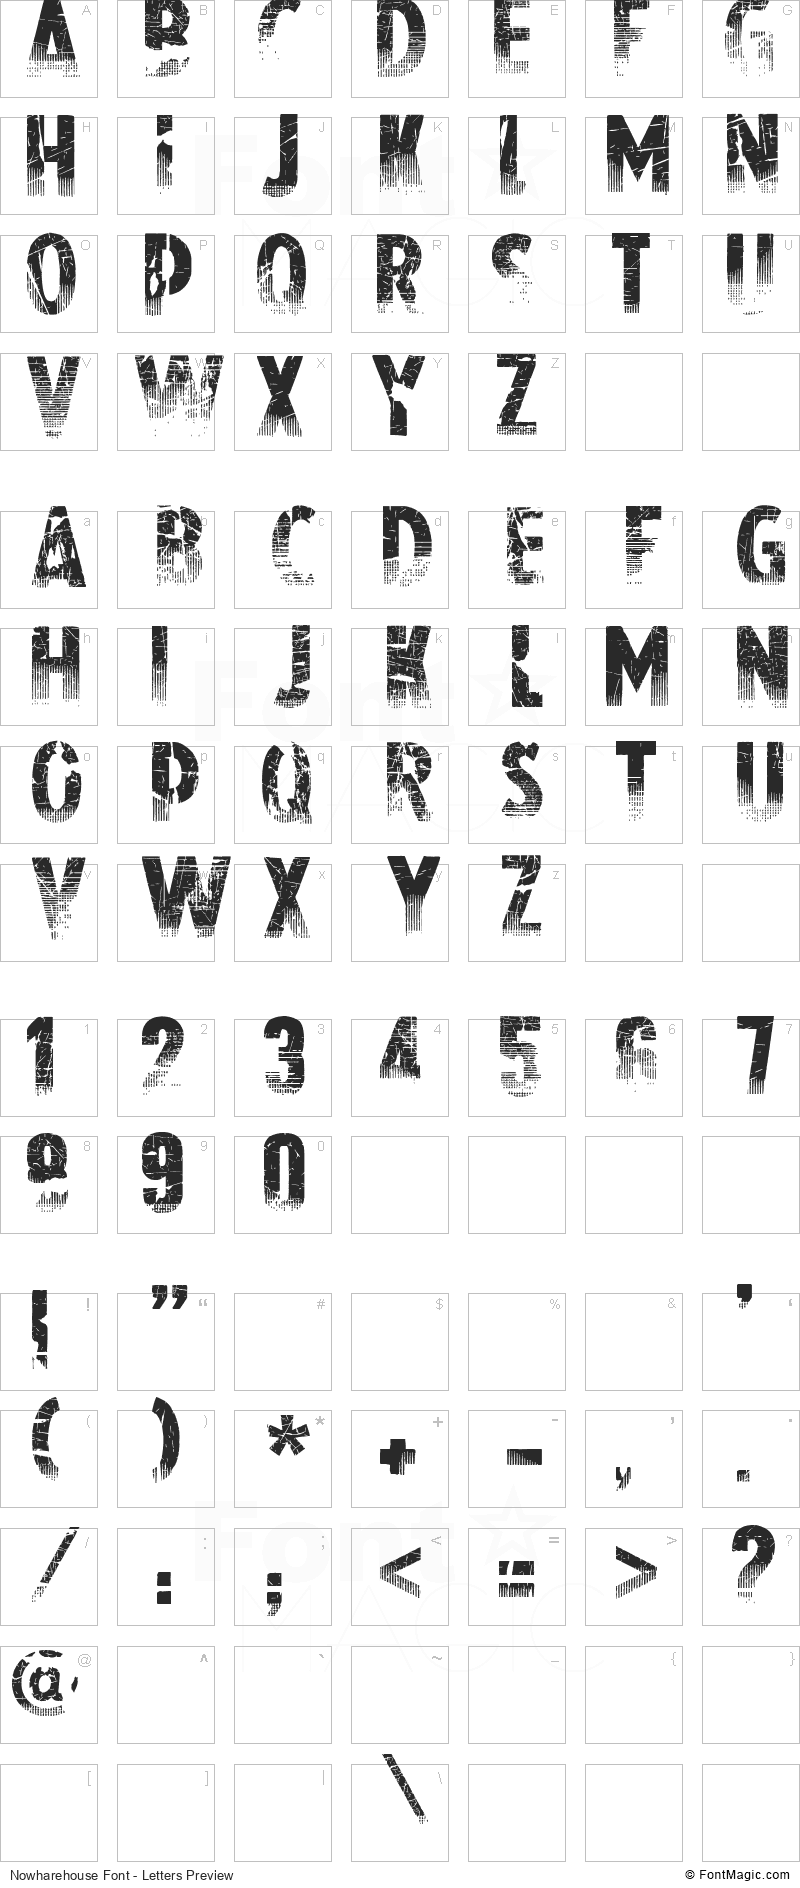 Nowharehouse Font - All Latters Preview Chart